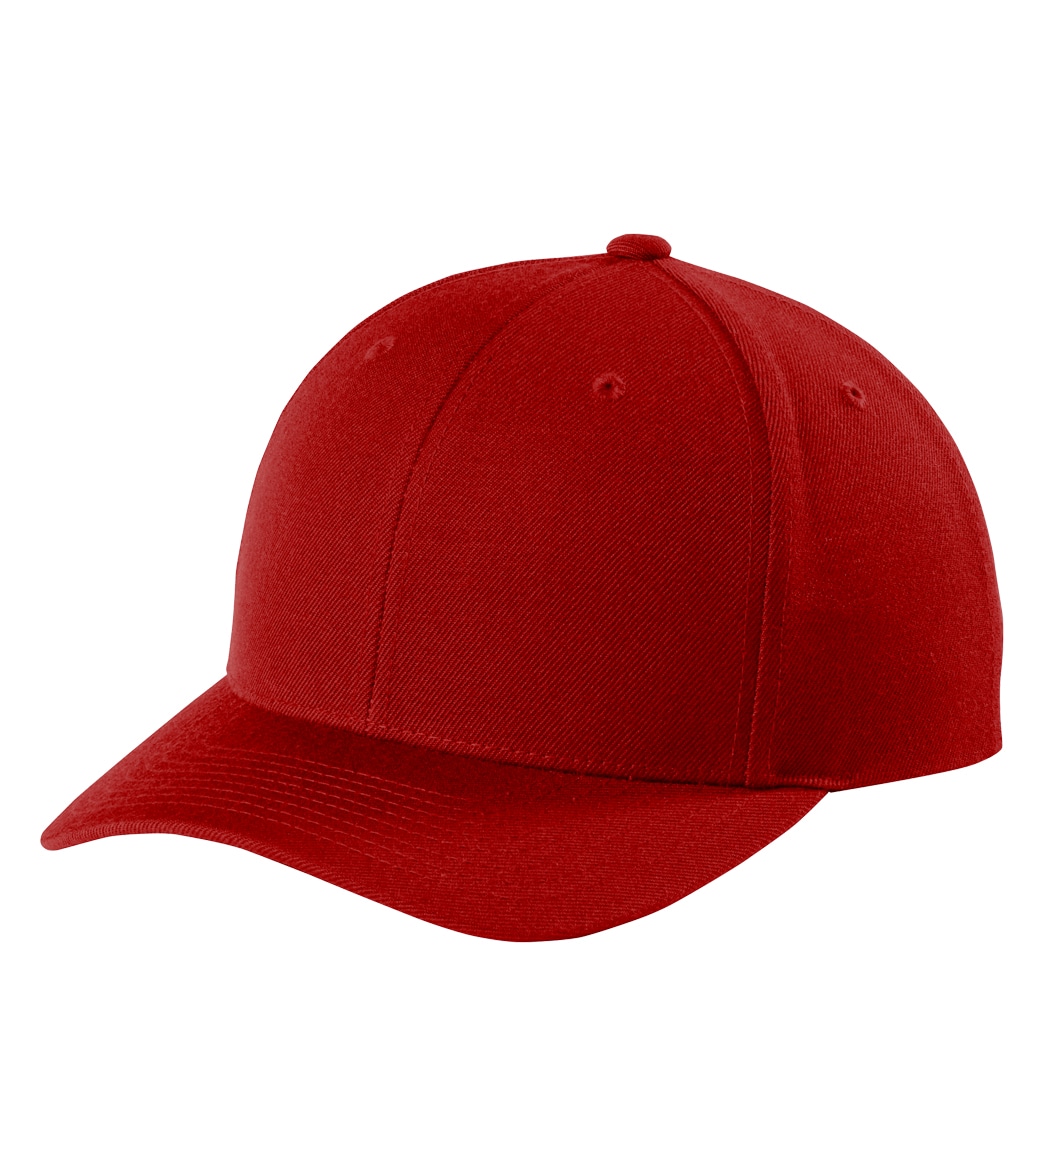 Structured Snapback Hat - True Red One Size - Swimoutlet.com